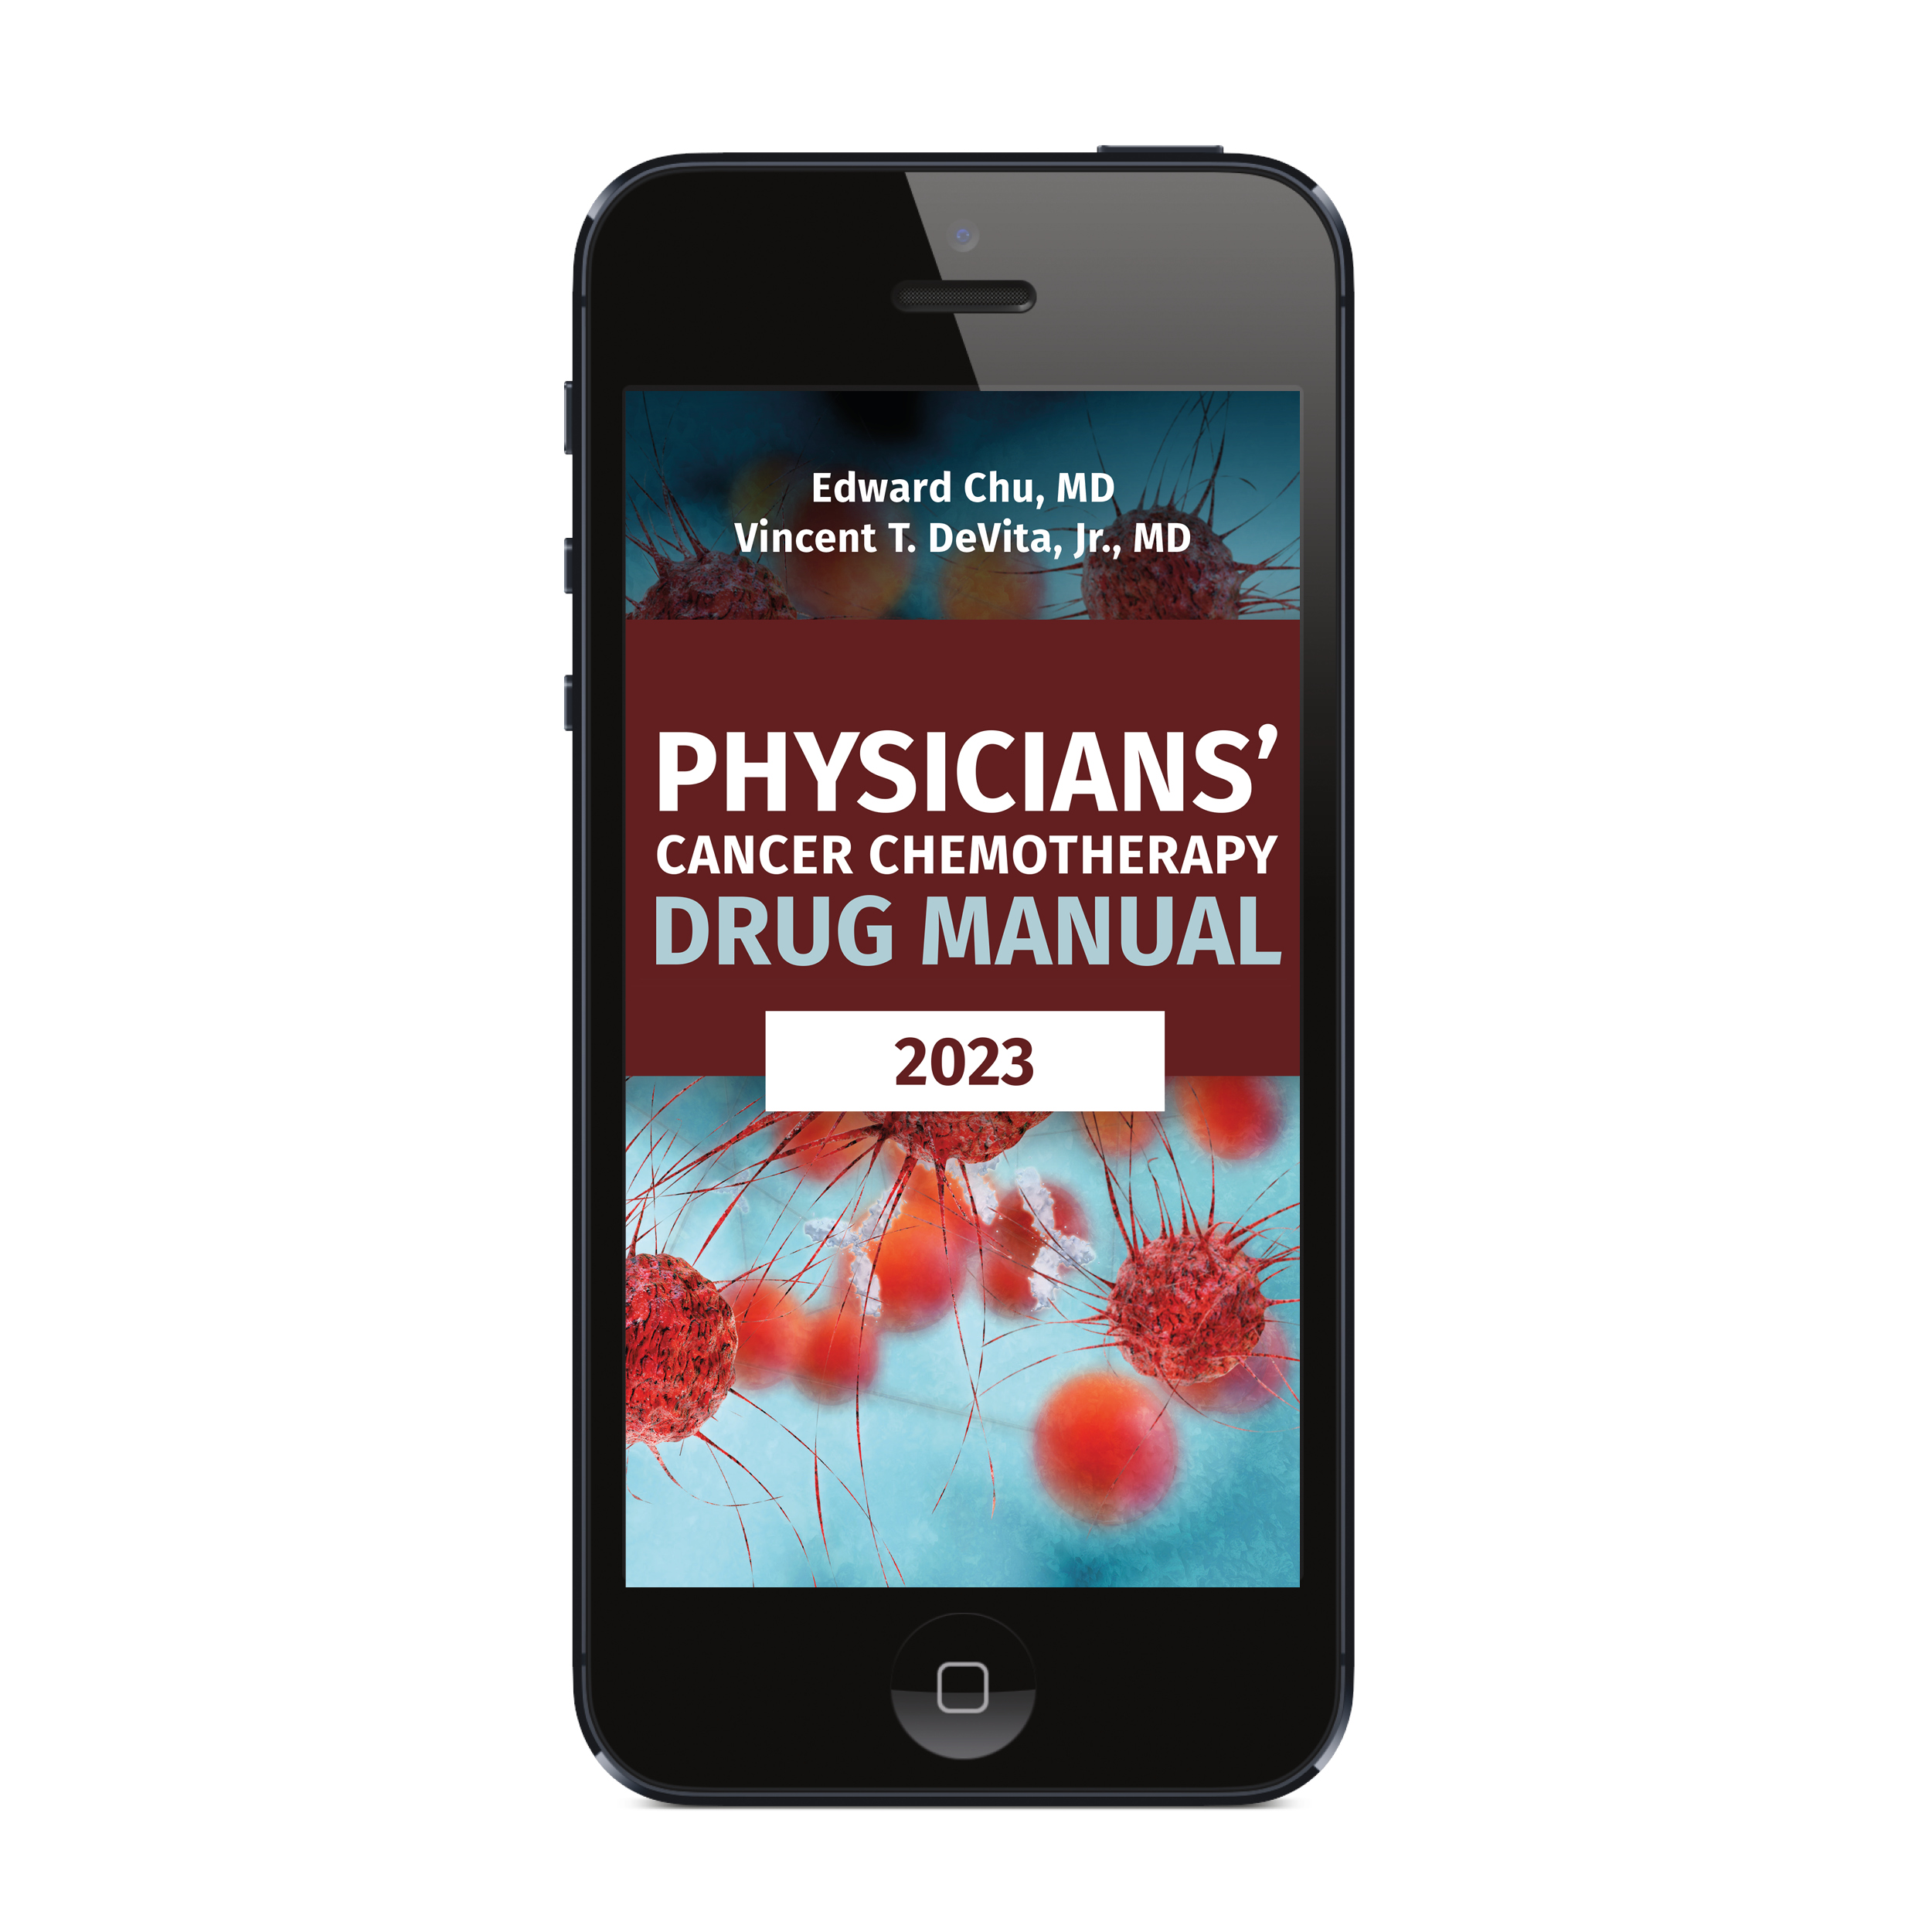 Physicians' Cancer Chemotherapy Drug Manual App 9781284187328